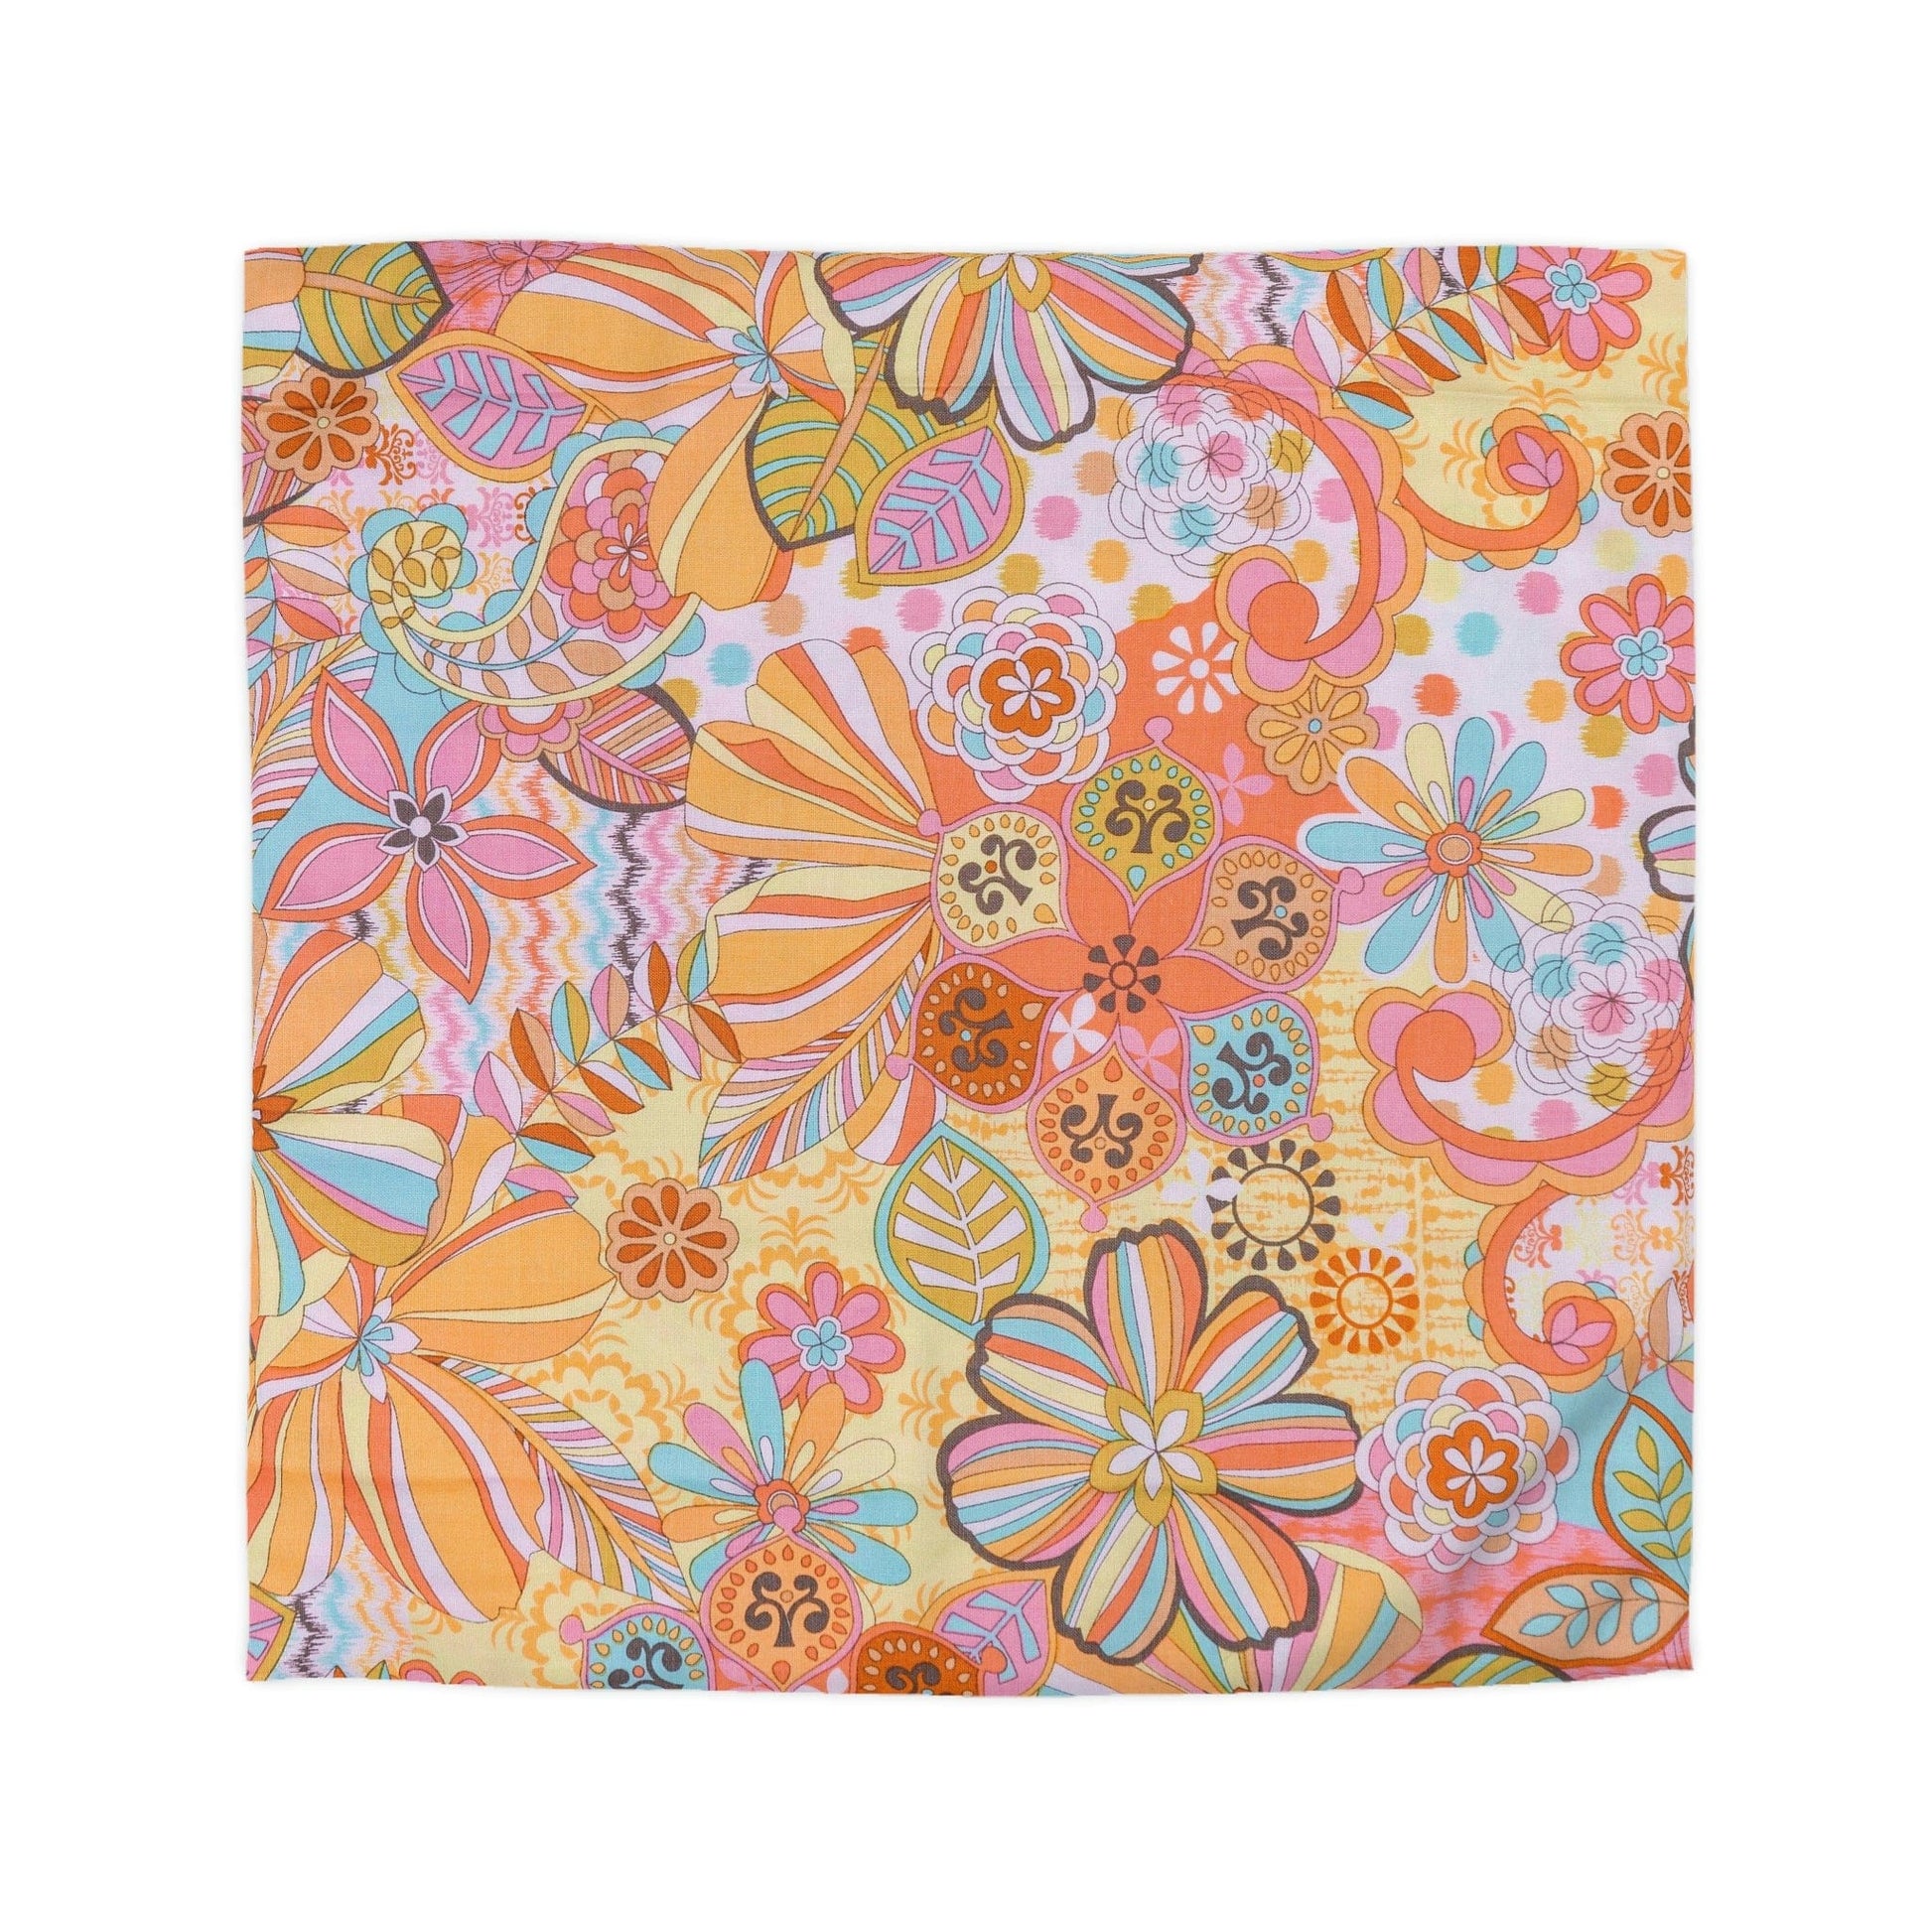 Kate McEnroe New York Retro Trippy Flower Power Duvet Cover, 70s Mid Mod Hippie Chic Floral Bedroom Decor with Groovy Orange, Yellow, and Blue Palette Duvet Covers Queen / White 94699745414280434805